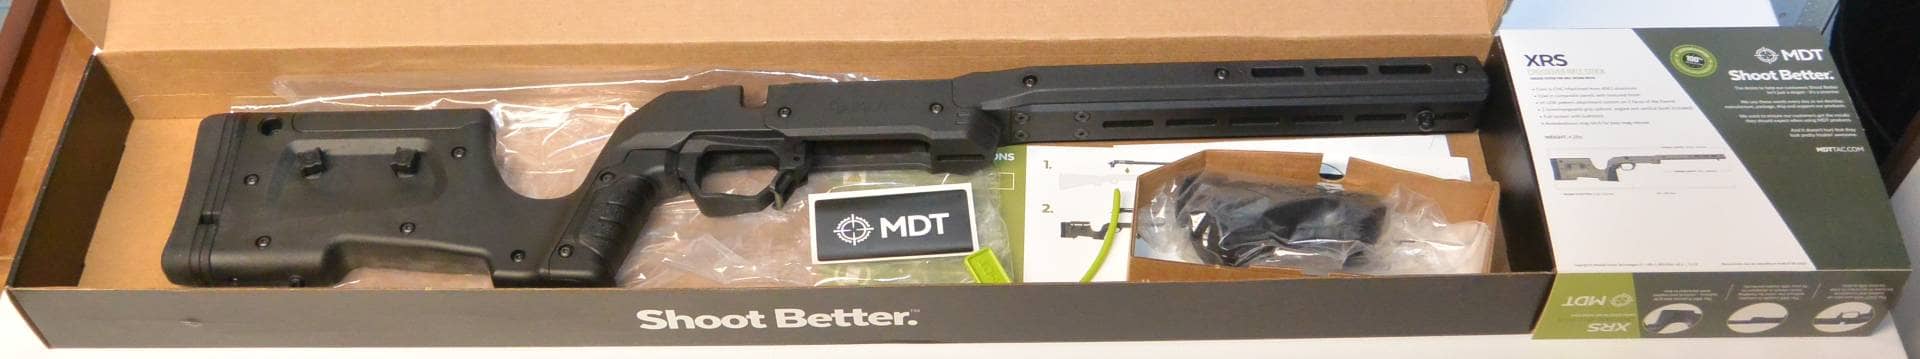 The MDT XRS unboxing pic. Very much a ready for retail shelves package